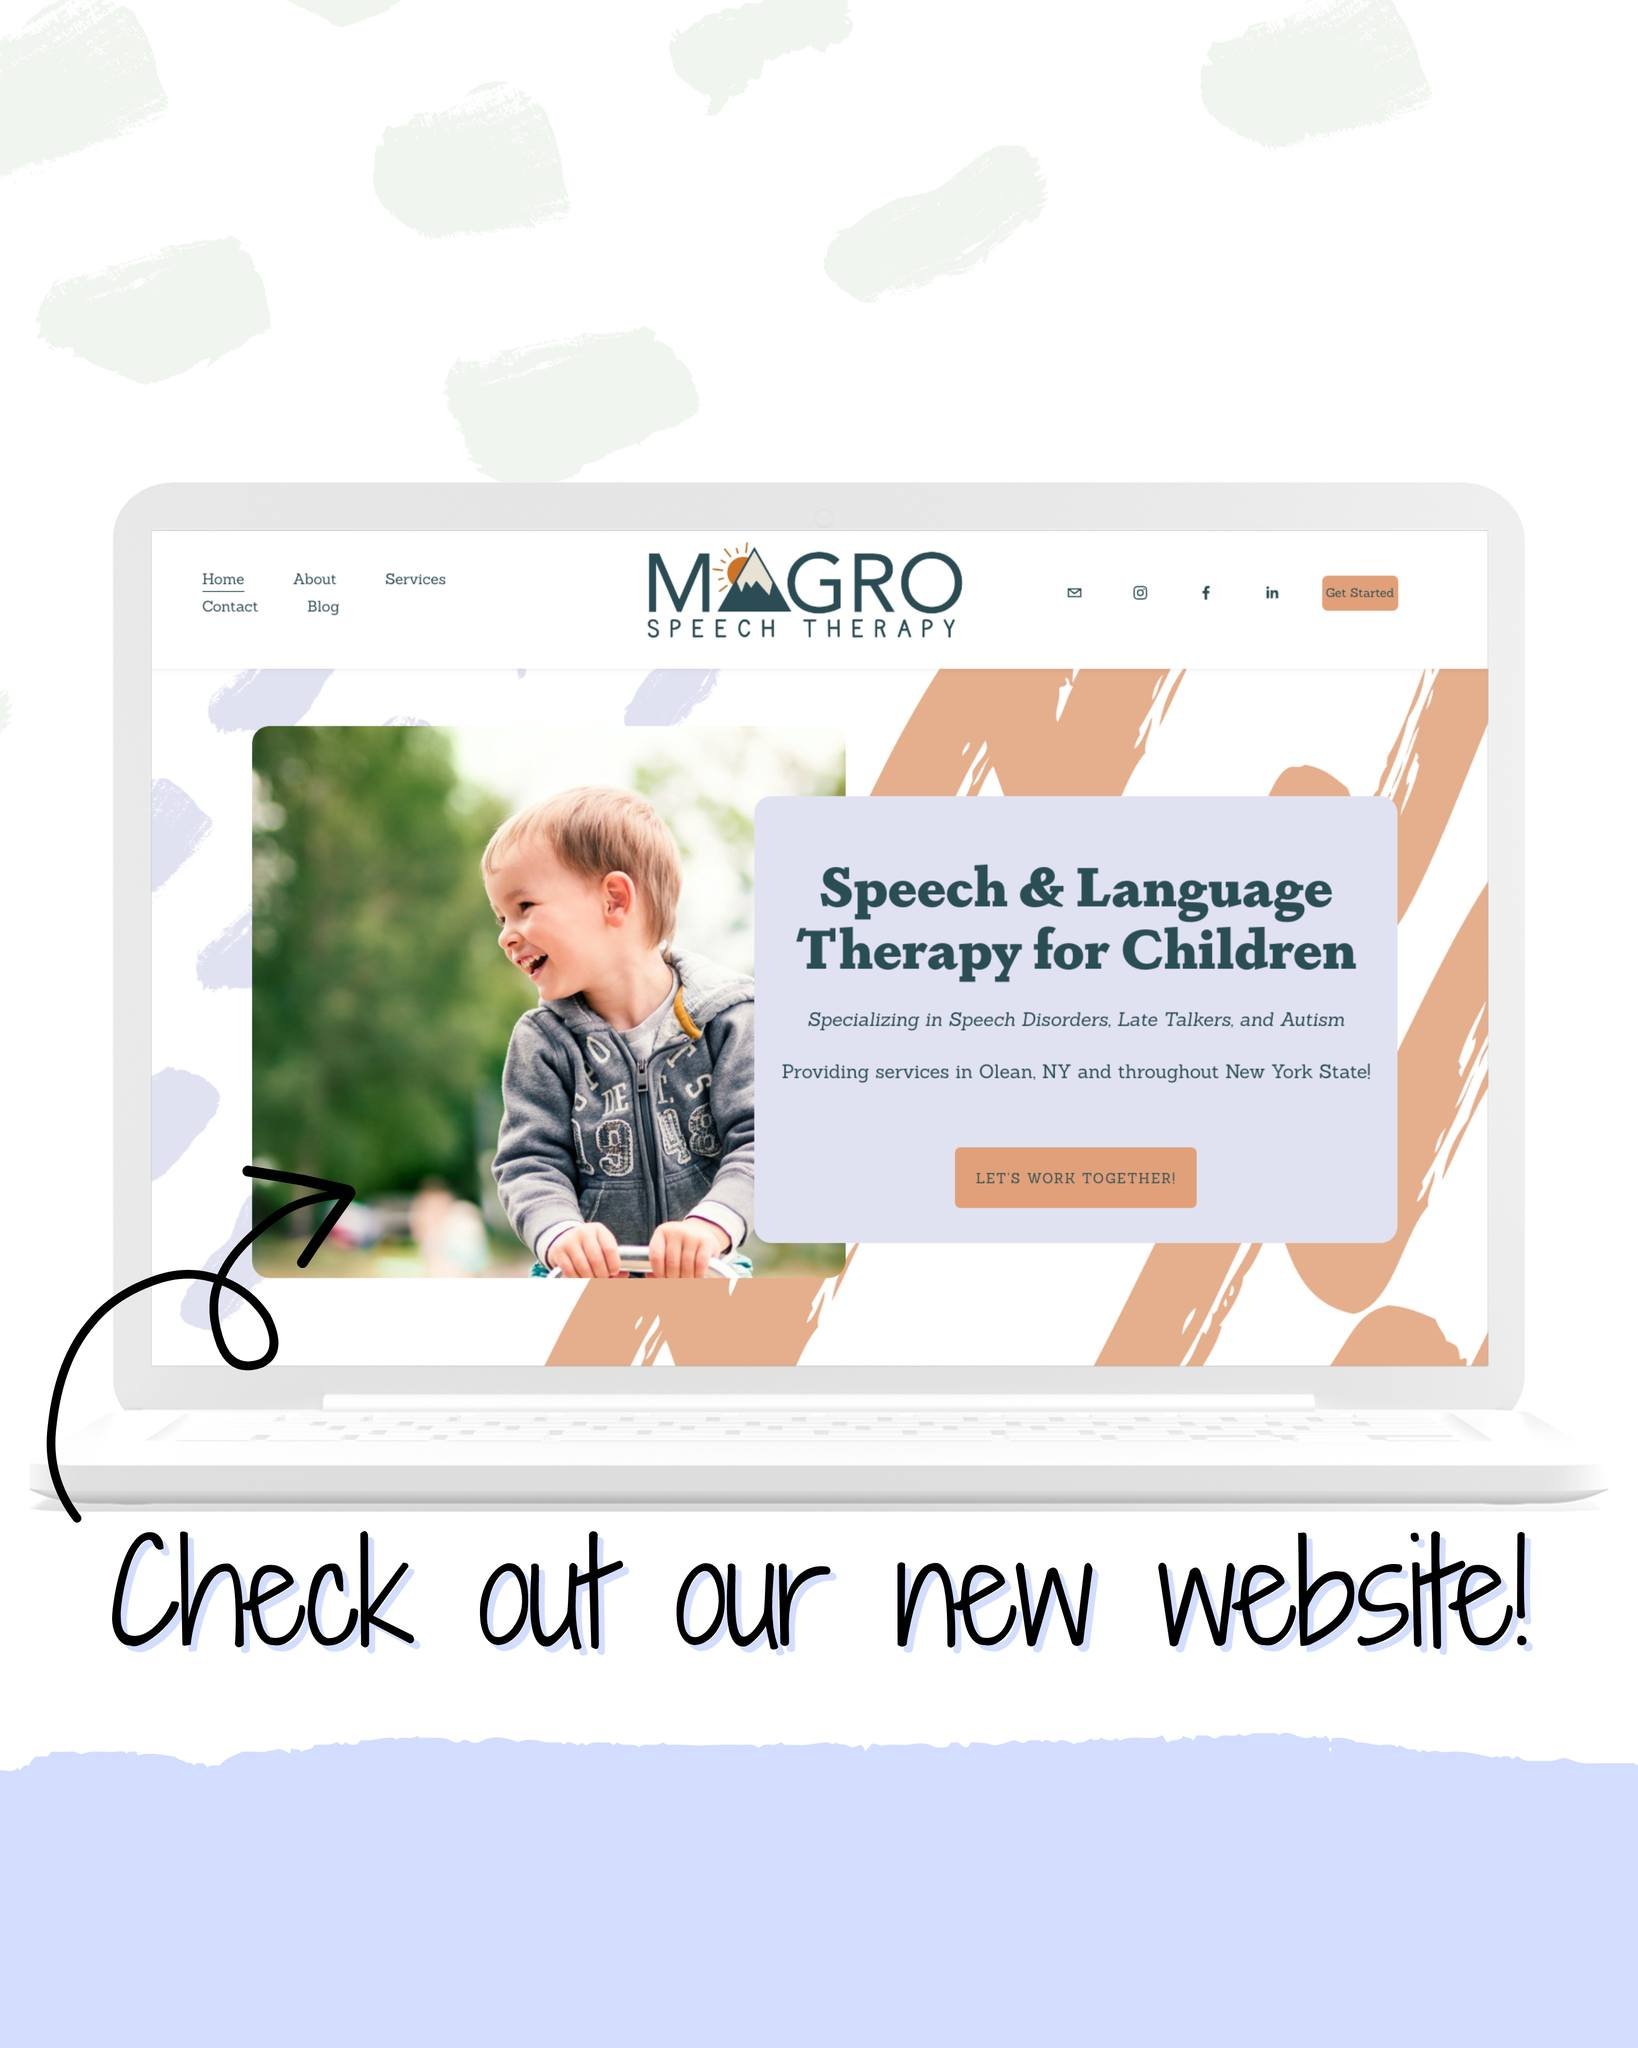 Check out our brand new website to learn more about our services, our expertise, and how we can best serve you! www.magrospeechtherapy.com
☝When you work with Magro Speech Therapy, you are working with a small, local business who puts you and your fa